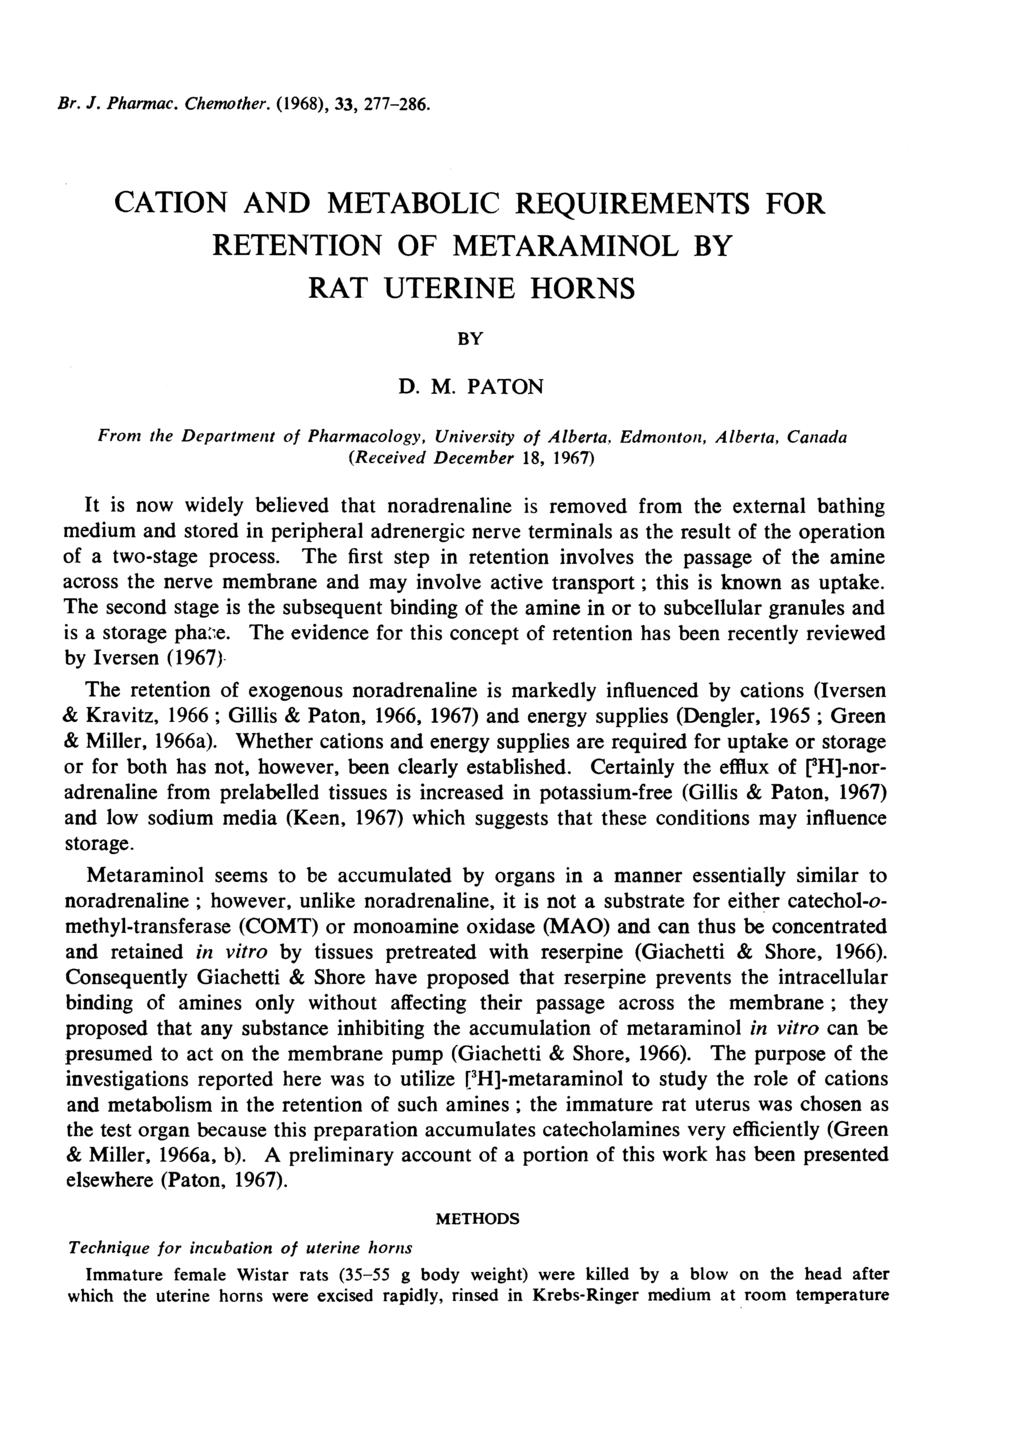 Br. J. Pharmac. Chemother. (1968), 33, 277-286. CATION AND METABOLIC REQUIREMENTS FOR RETENTION OF METARAMINOL BY RAT UTERINE HORNS BY From the Department of Pharmacology, University of Alberta!